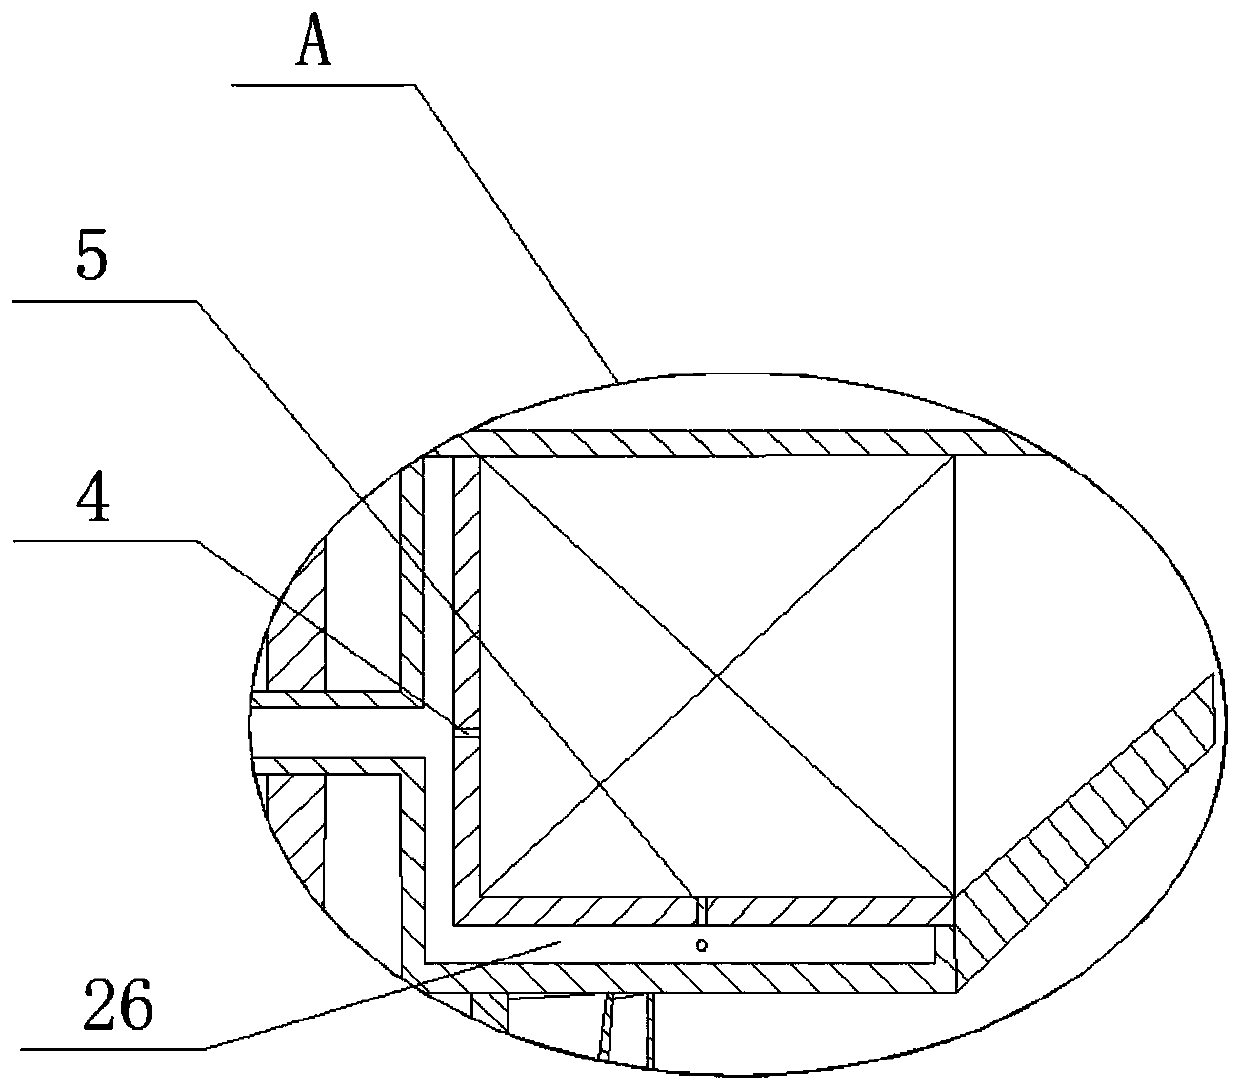 Gas turbine low-emission combustion chamber using gas fuels